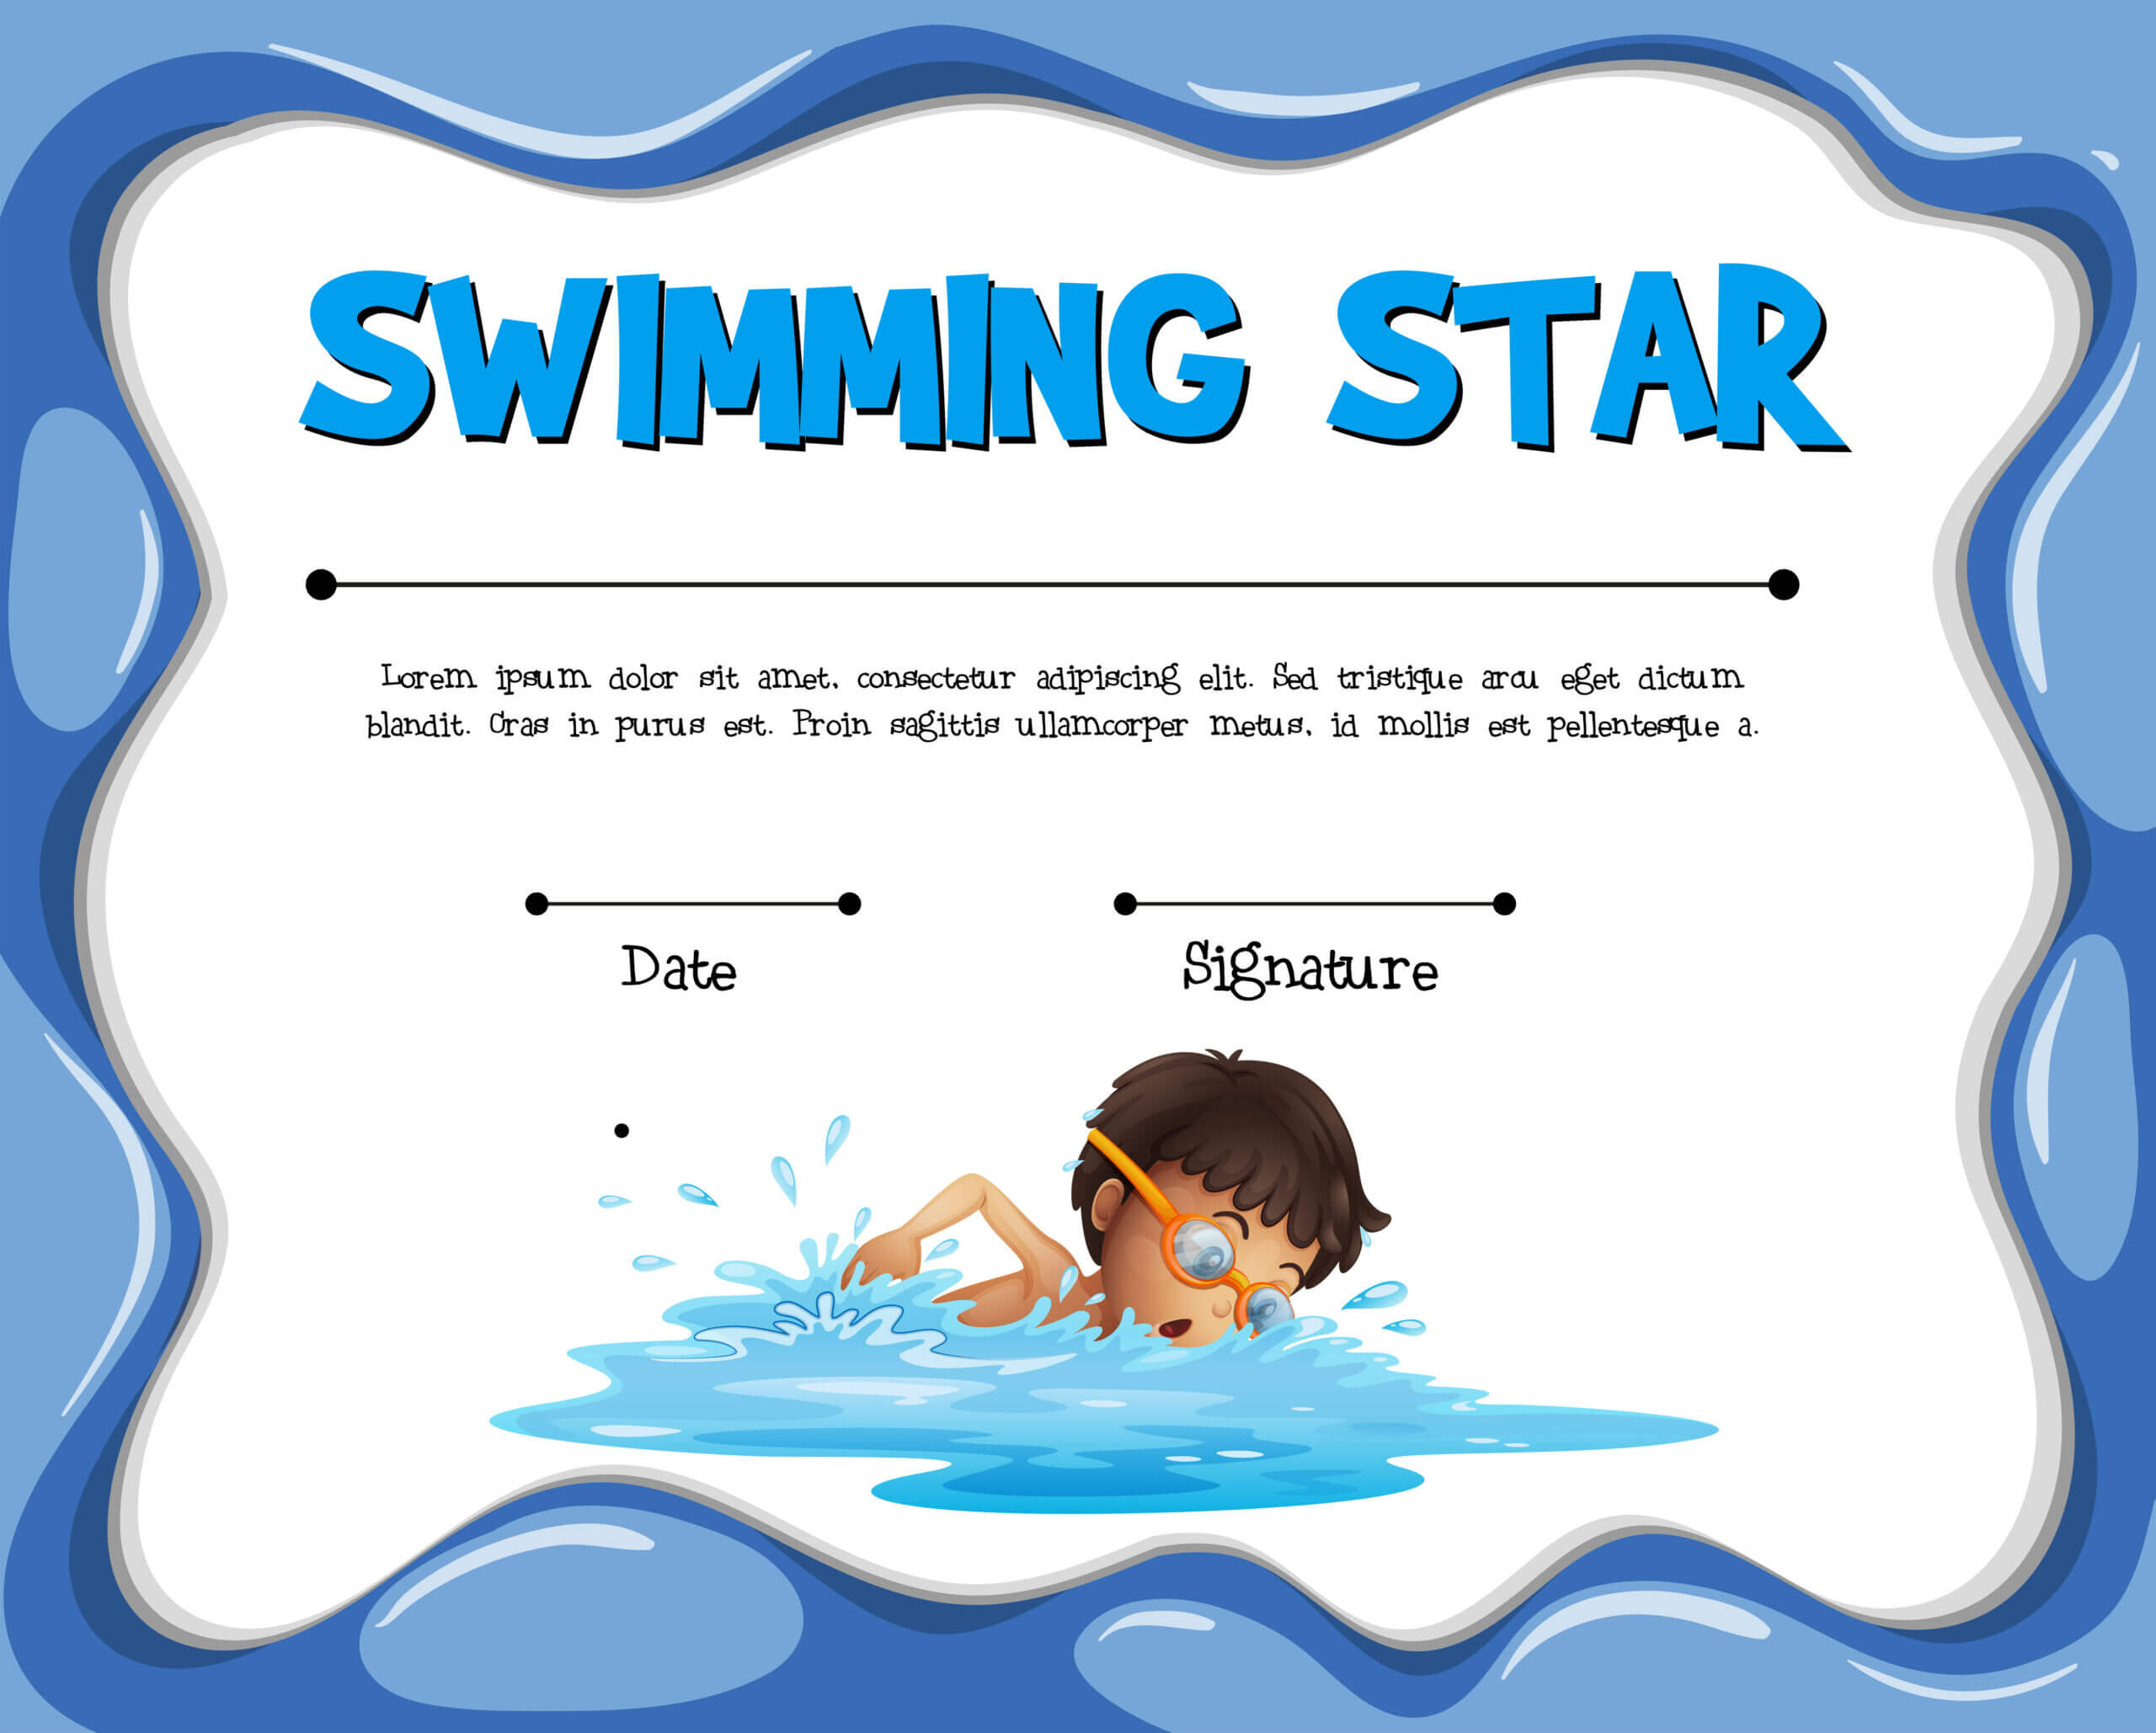 Swimming Star Certification Template With Swimmer – Download With Swimming Certificate Templates Free